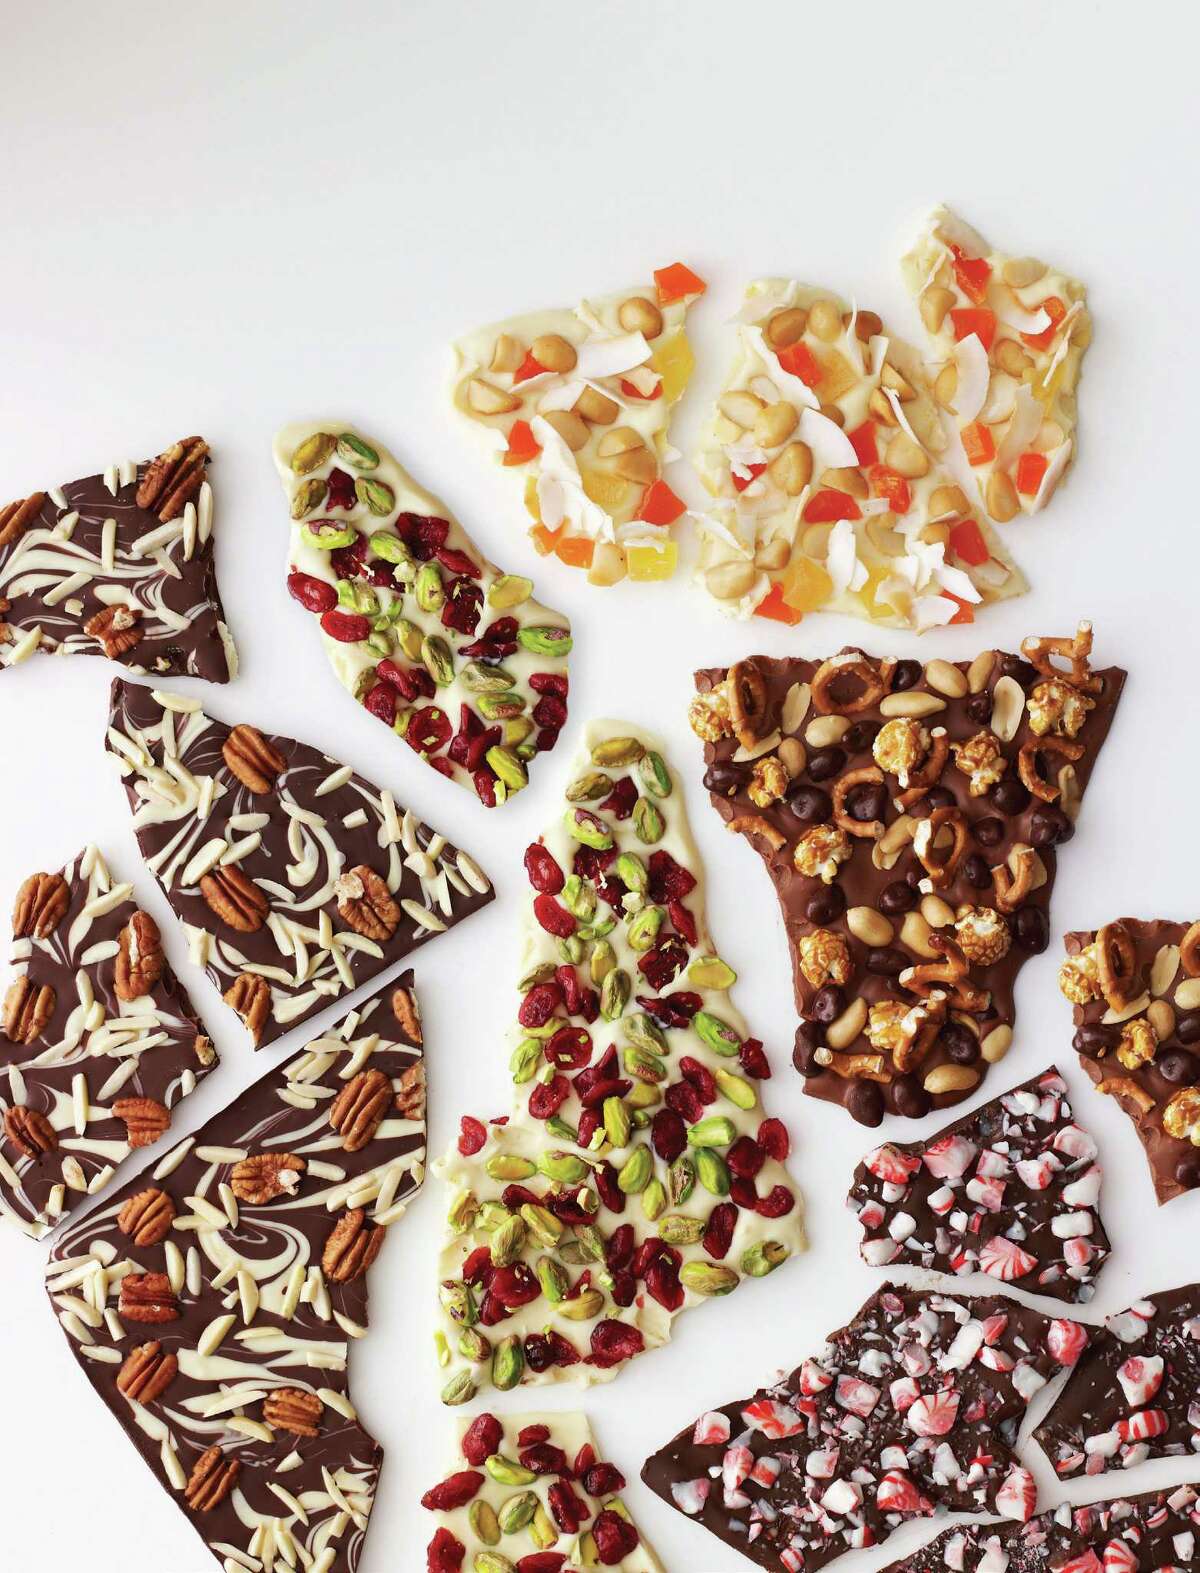 Variations of chocolate barks from "Holiday Cheer" by Hearst Communications.